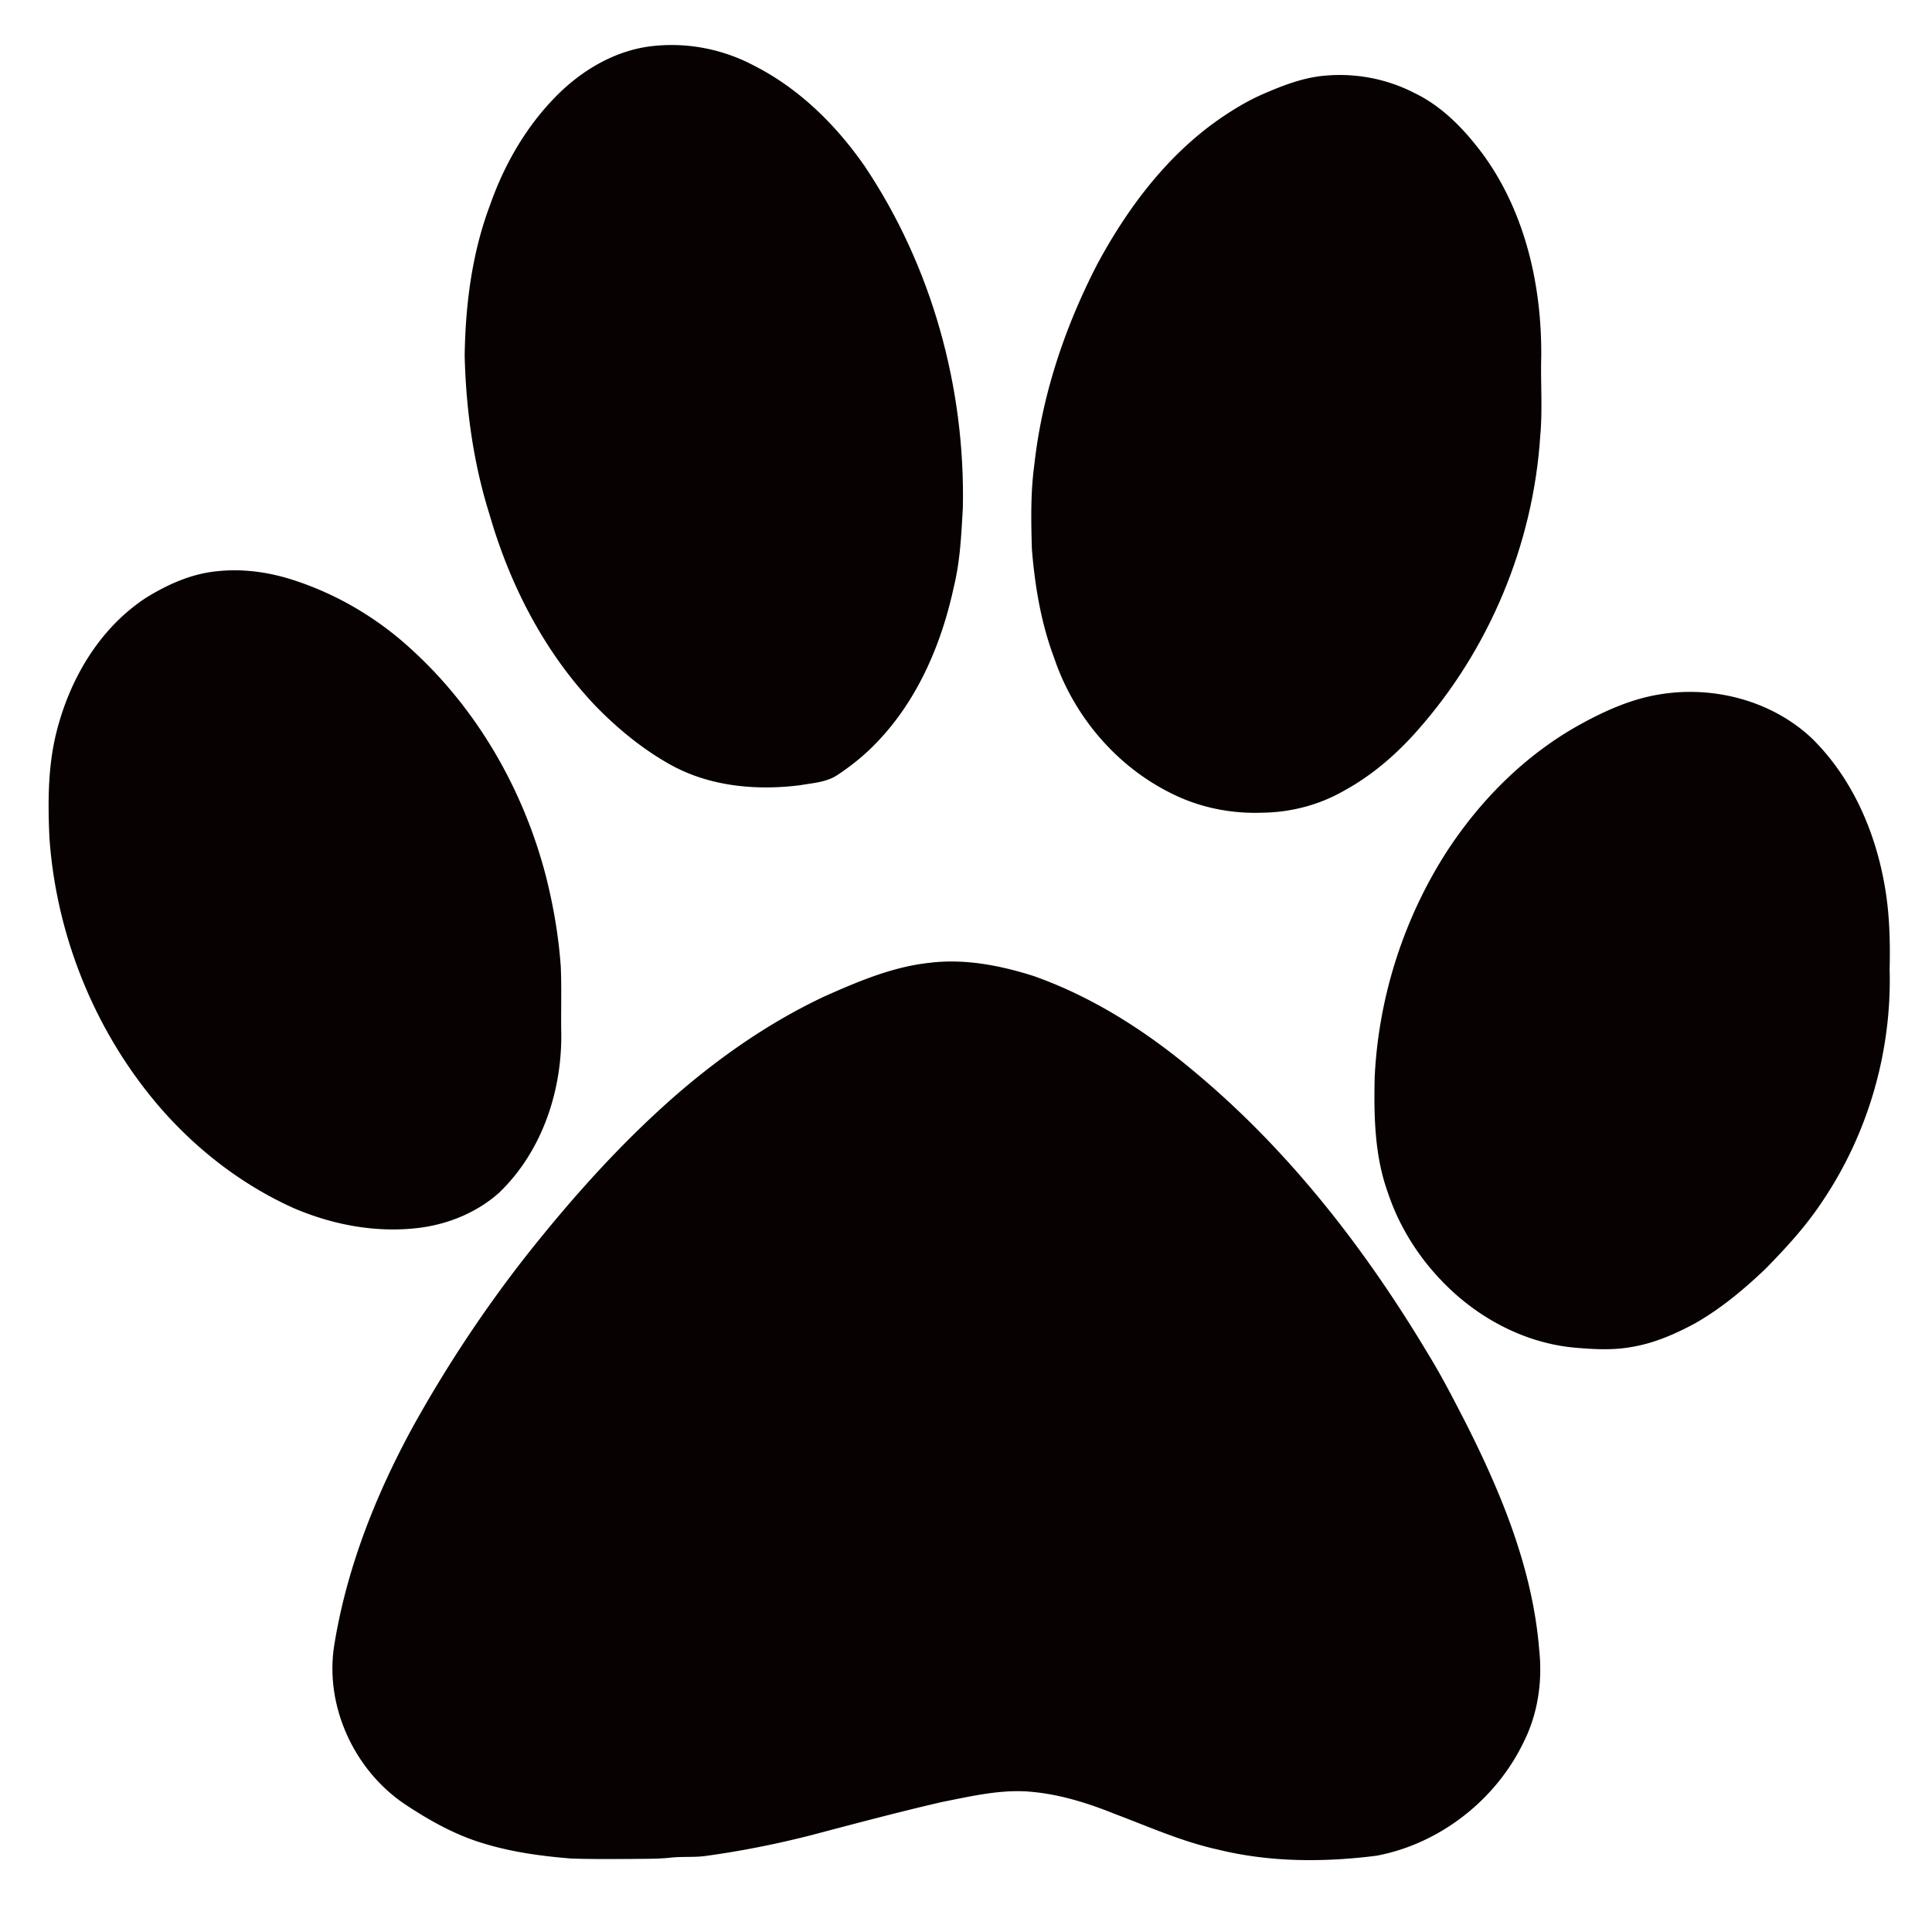 Panther Paw Logo - Panther Paw Print Clip Art - ClipArt Best - ClipArt Best | Locker ...